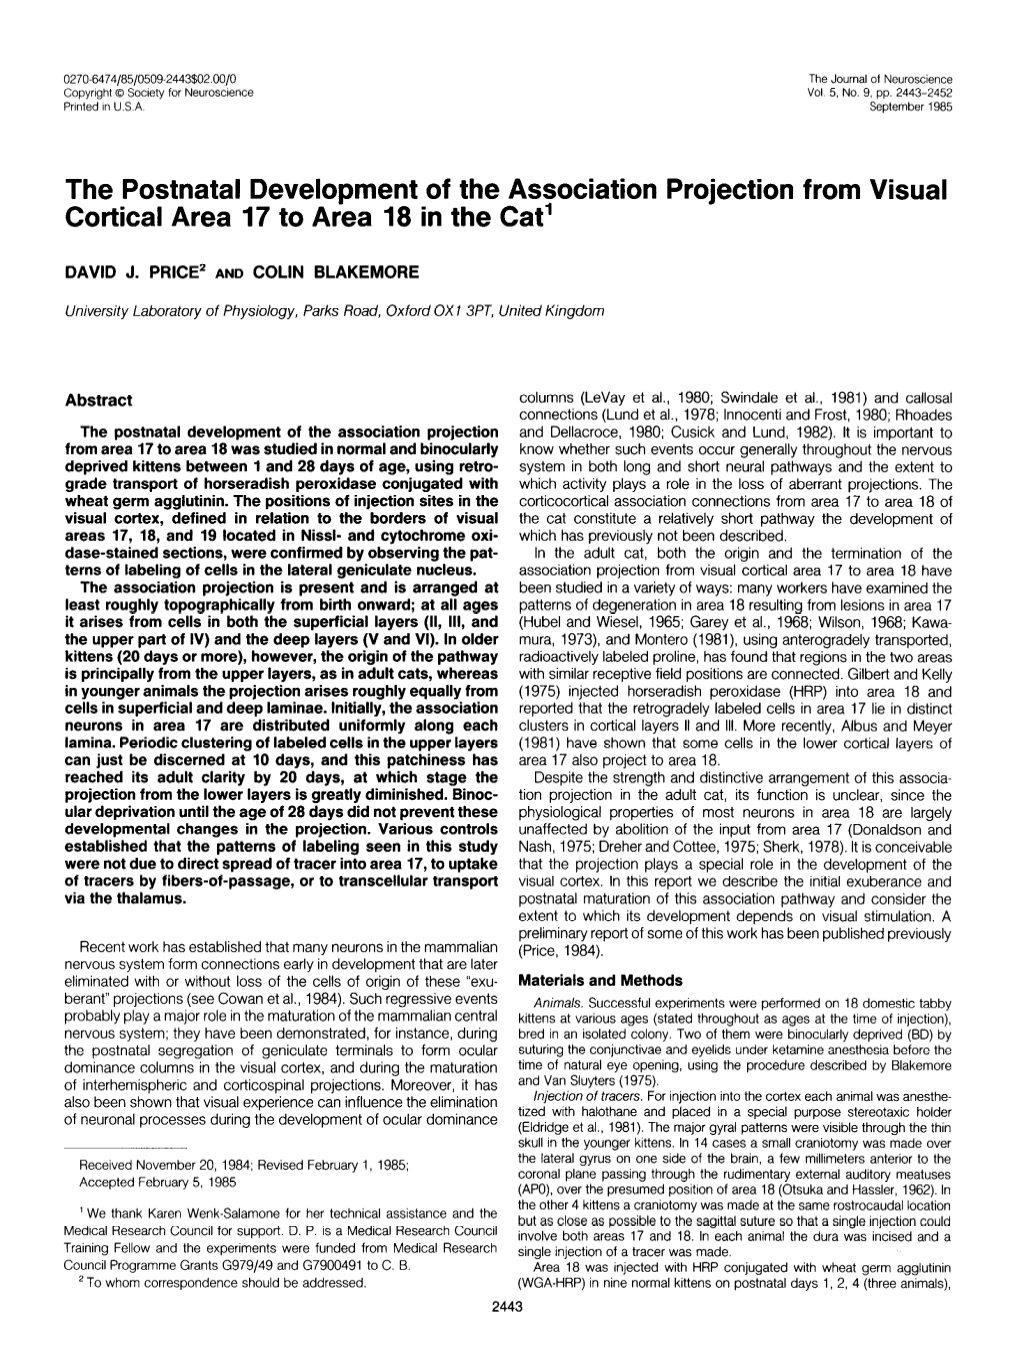 The Postnatal Development of the Association Projection from Visual Cortical Area 17 to Area 18 in the Cat’